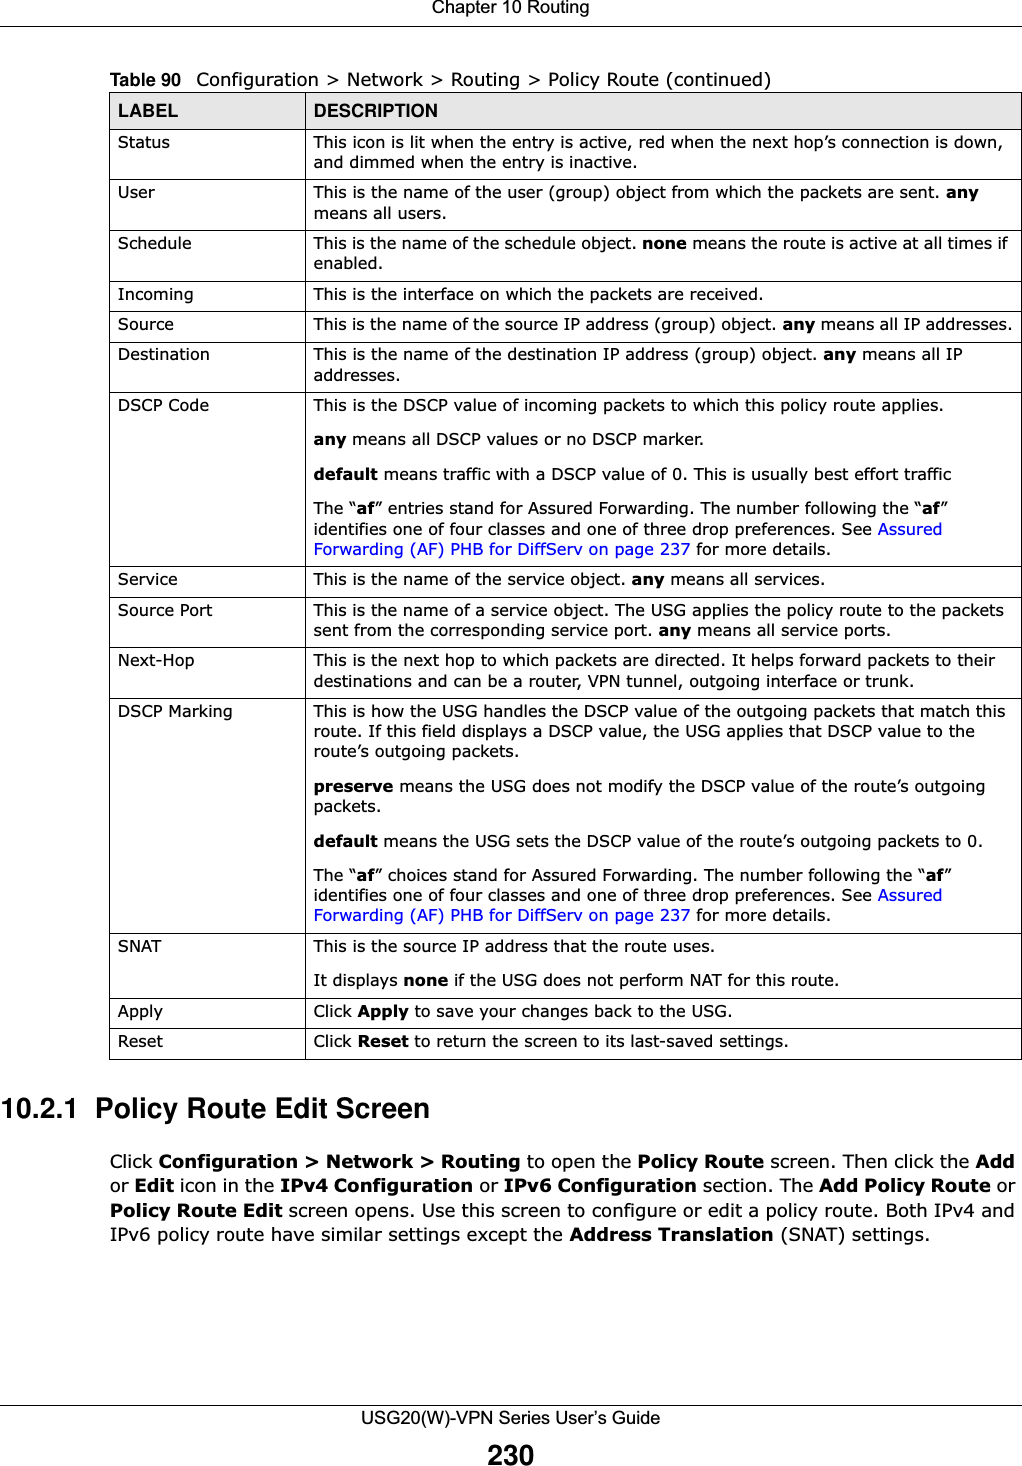 Chapter 10 RoutingUSG20(W)-VPN Series User’s Guide23010.2.1  Policy Route Edit ScreenClick Configuration &gt; Network &gt; Routing to open the Policy Route screen. Then click the Add or Edit icon in the IPv4 Configuration or IPv6 Configuration section. The Add Policy Route or Policy Route Edit screen opens. Use this screen to configure or edit a policy route. Both IPv4 and IPv6 policy route have similar settings except the Address Translation (SNAT) settings.Status This icon is lit when the entry is active, red when the next hop’s connection is down, and dimmed when the entry is inactive.User This is the name of the user (group) object from which the packets are sent. any means all users.Schedule This is the name of the schedule object. none means the route is active at all times if enabled.Incoming  This is the interface on which the packets are received.Source  This is the name of the source IP address (group) object. any means all IP addresses.Destination  This is the name of the destination IP address (group) object. any means all IP addresses.DSCP Code This is the DSCP value of incoming packets to which this policy route applies. any means all DSCP values or no DSCP marker. default means traffic with a DSCP value of 0. This is usually best effort traffic The “af” entries stand for Assured Forwarding. The number following the “af” identifies one of four classes and one of three drop preferences. See Assured Forwarding (AF) PHB for DiffServ on page 237 for more details.Service This is the name of the service object. any means all services.Source Port This is the name of a service object. The USG applies the policy route to the packets sent from the corresponding service port. any means all service ports.Next-Hop  This is the next hop to which packets are directed. It helps forward packets to their destinations and can be a router, VPN tunnel, outgoing interface or trunk.DSCP Marking This is how the USG handles the DSCP value of the outgoing packets that match this route. If this field displays a DSCP value, the USG applies that DSCP value to the route’s outgoing packets.preserve means the USG does not modify the DSCP value of the route’s outgoing packets. default means the USG sets the DSCP value of the route’s outgoing packets to 0.The “af” choices stand for Assured Forwarding. The number following the “af” identifies one of four classes and one of three drop preferences. See Assured Forwarding (AF) PHB for DiffServ on page 237 for more details.SNAT This is the source IP address that the route uses.It displays none if the USG does not perform NAT for this route.Apply Click Apply to save your changes back to the USG.Reset Click Reset to return the screen to its last-saved settings. Table 90   Configuration &gt; Network &gt; Routing &gt; Policy Route (continued)LABEL DESCRIPTION